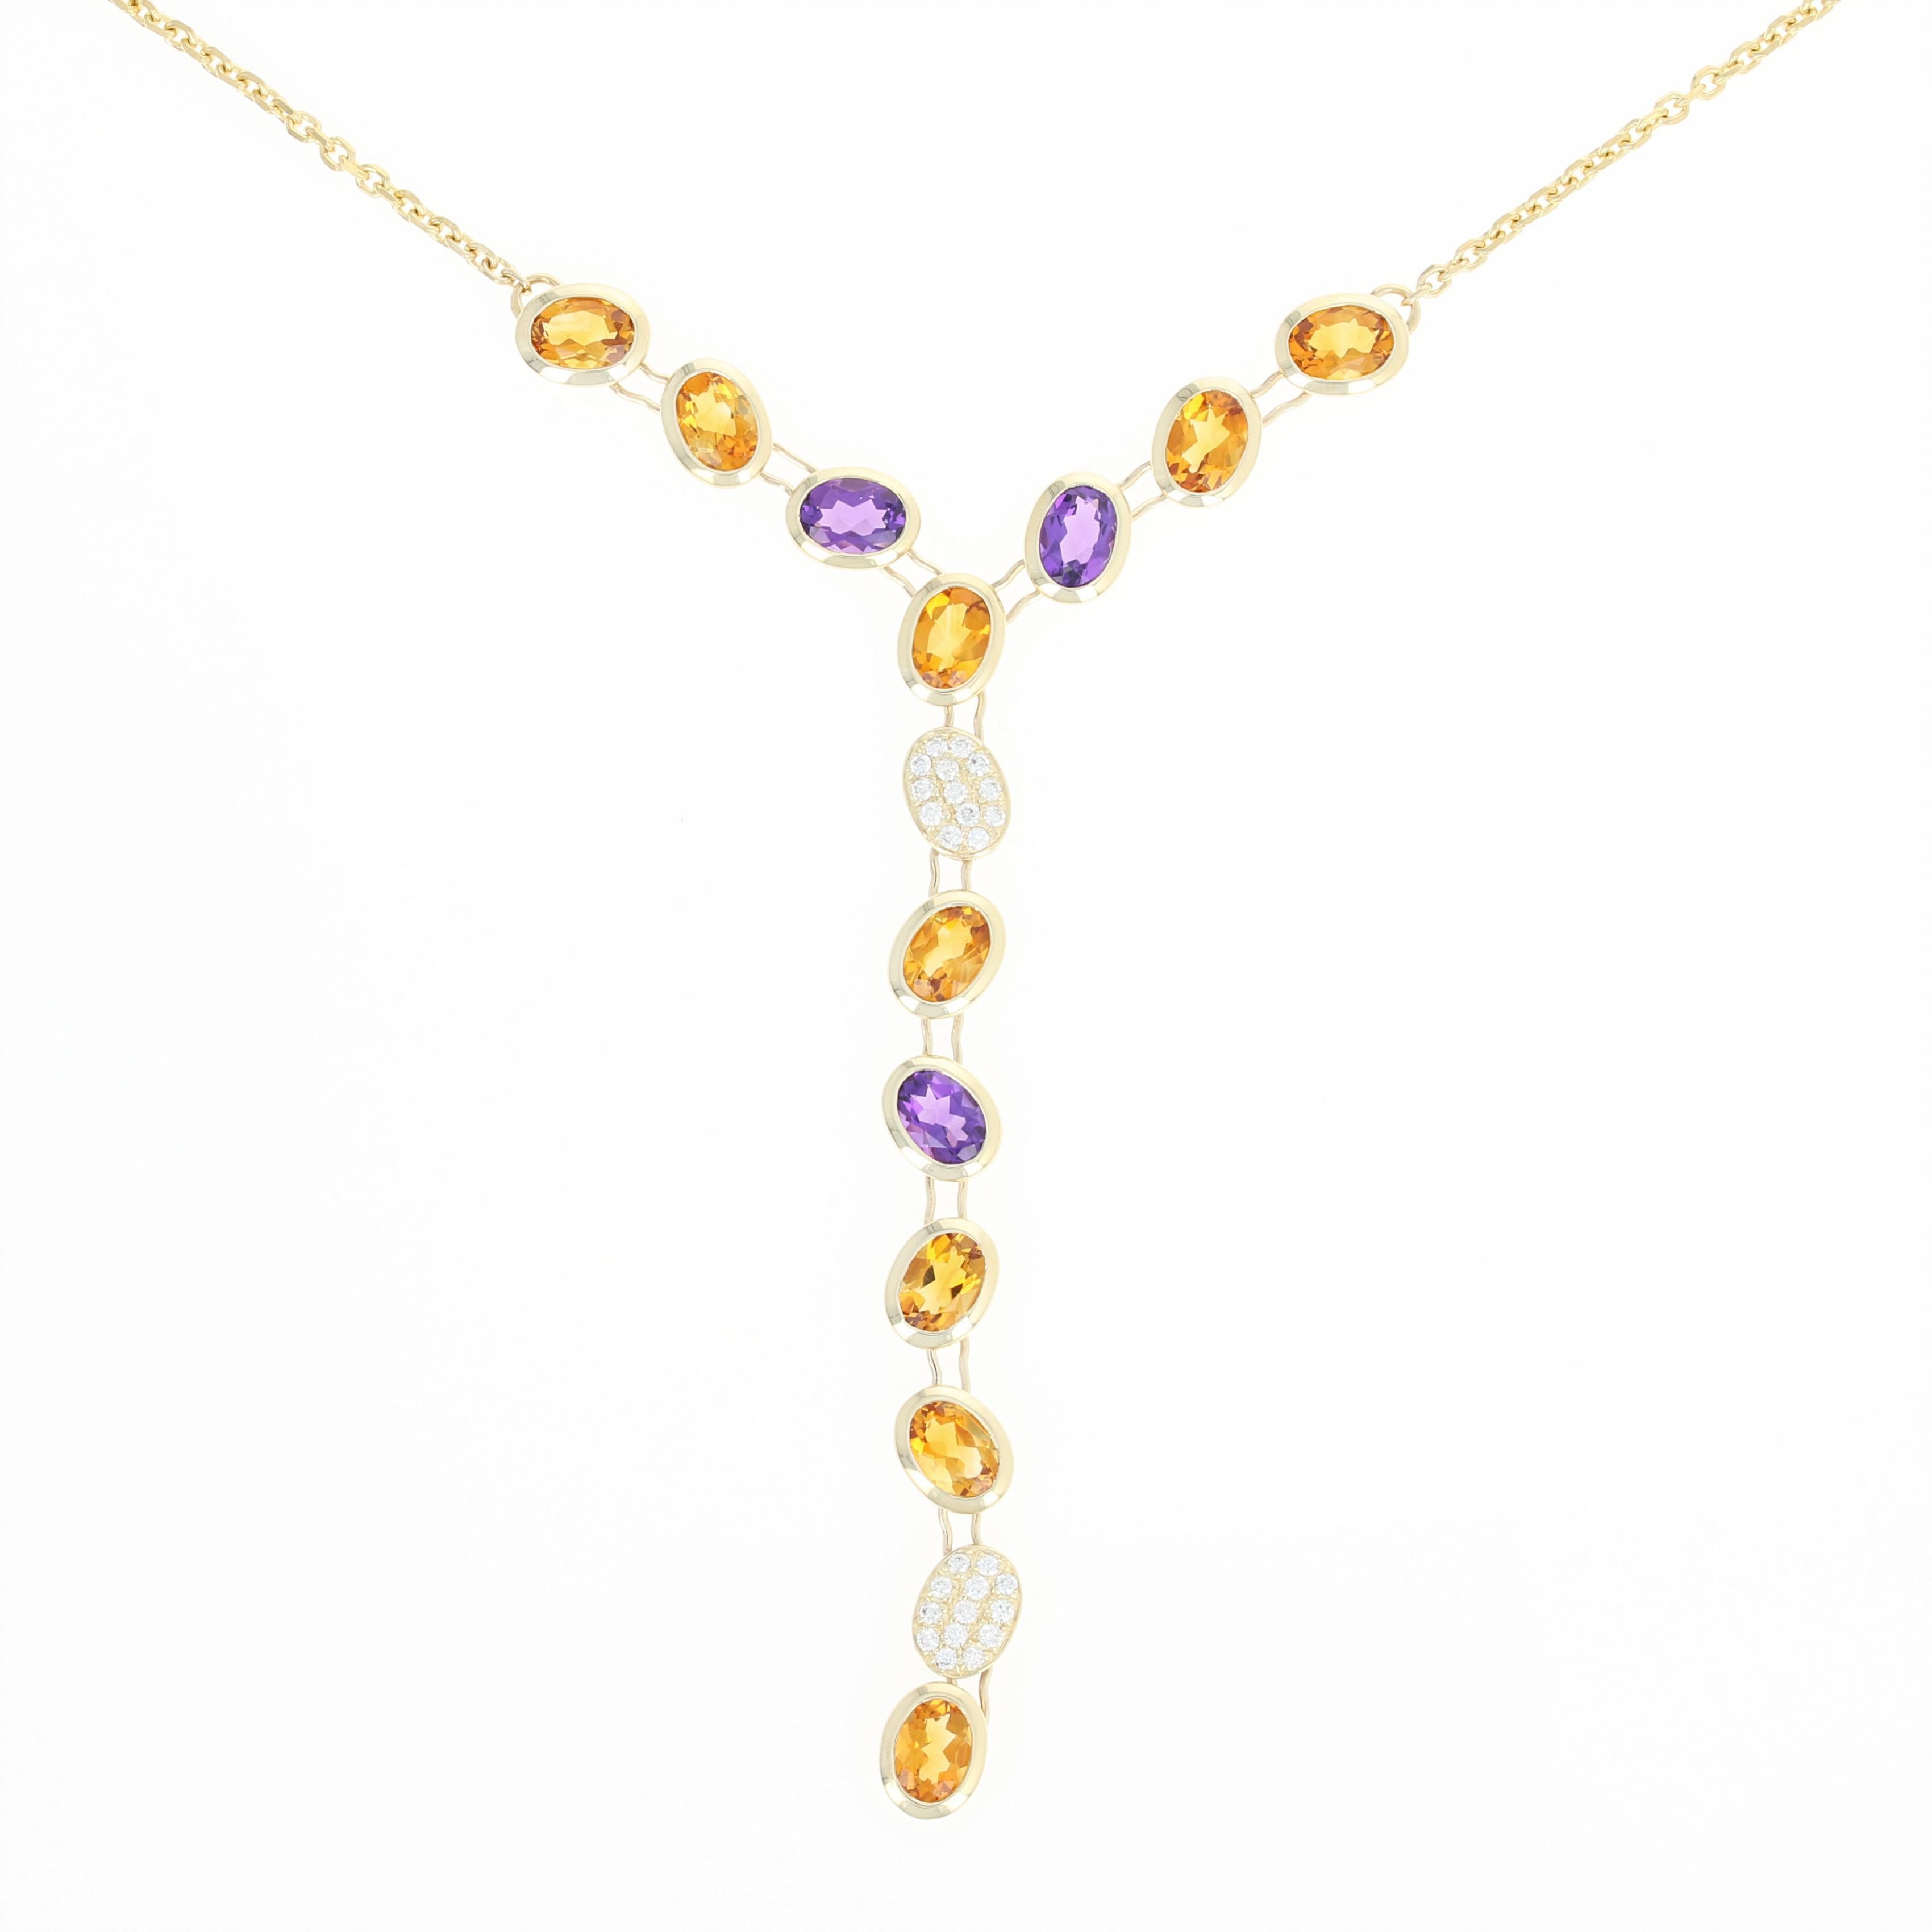 Sweet drops of sunshine! Fashioned in 14k yellow gold, this cable chain necklace showcases an attached Y-shaped drop pendant adorned with a cascading array of glowing citrines, vivacious amethysts, and glittering diamonds that are ready to dazzle